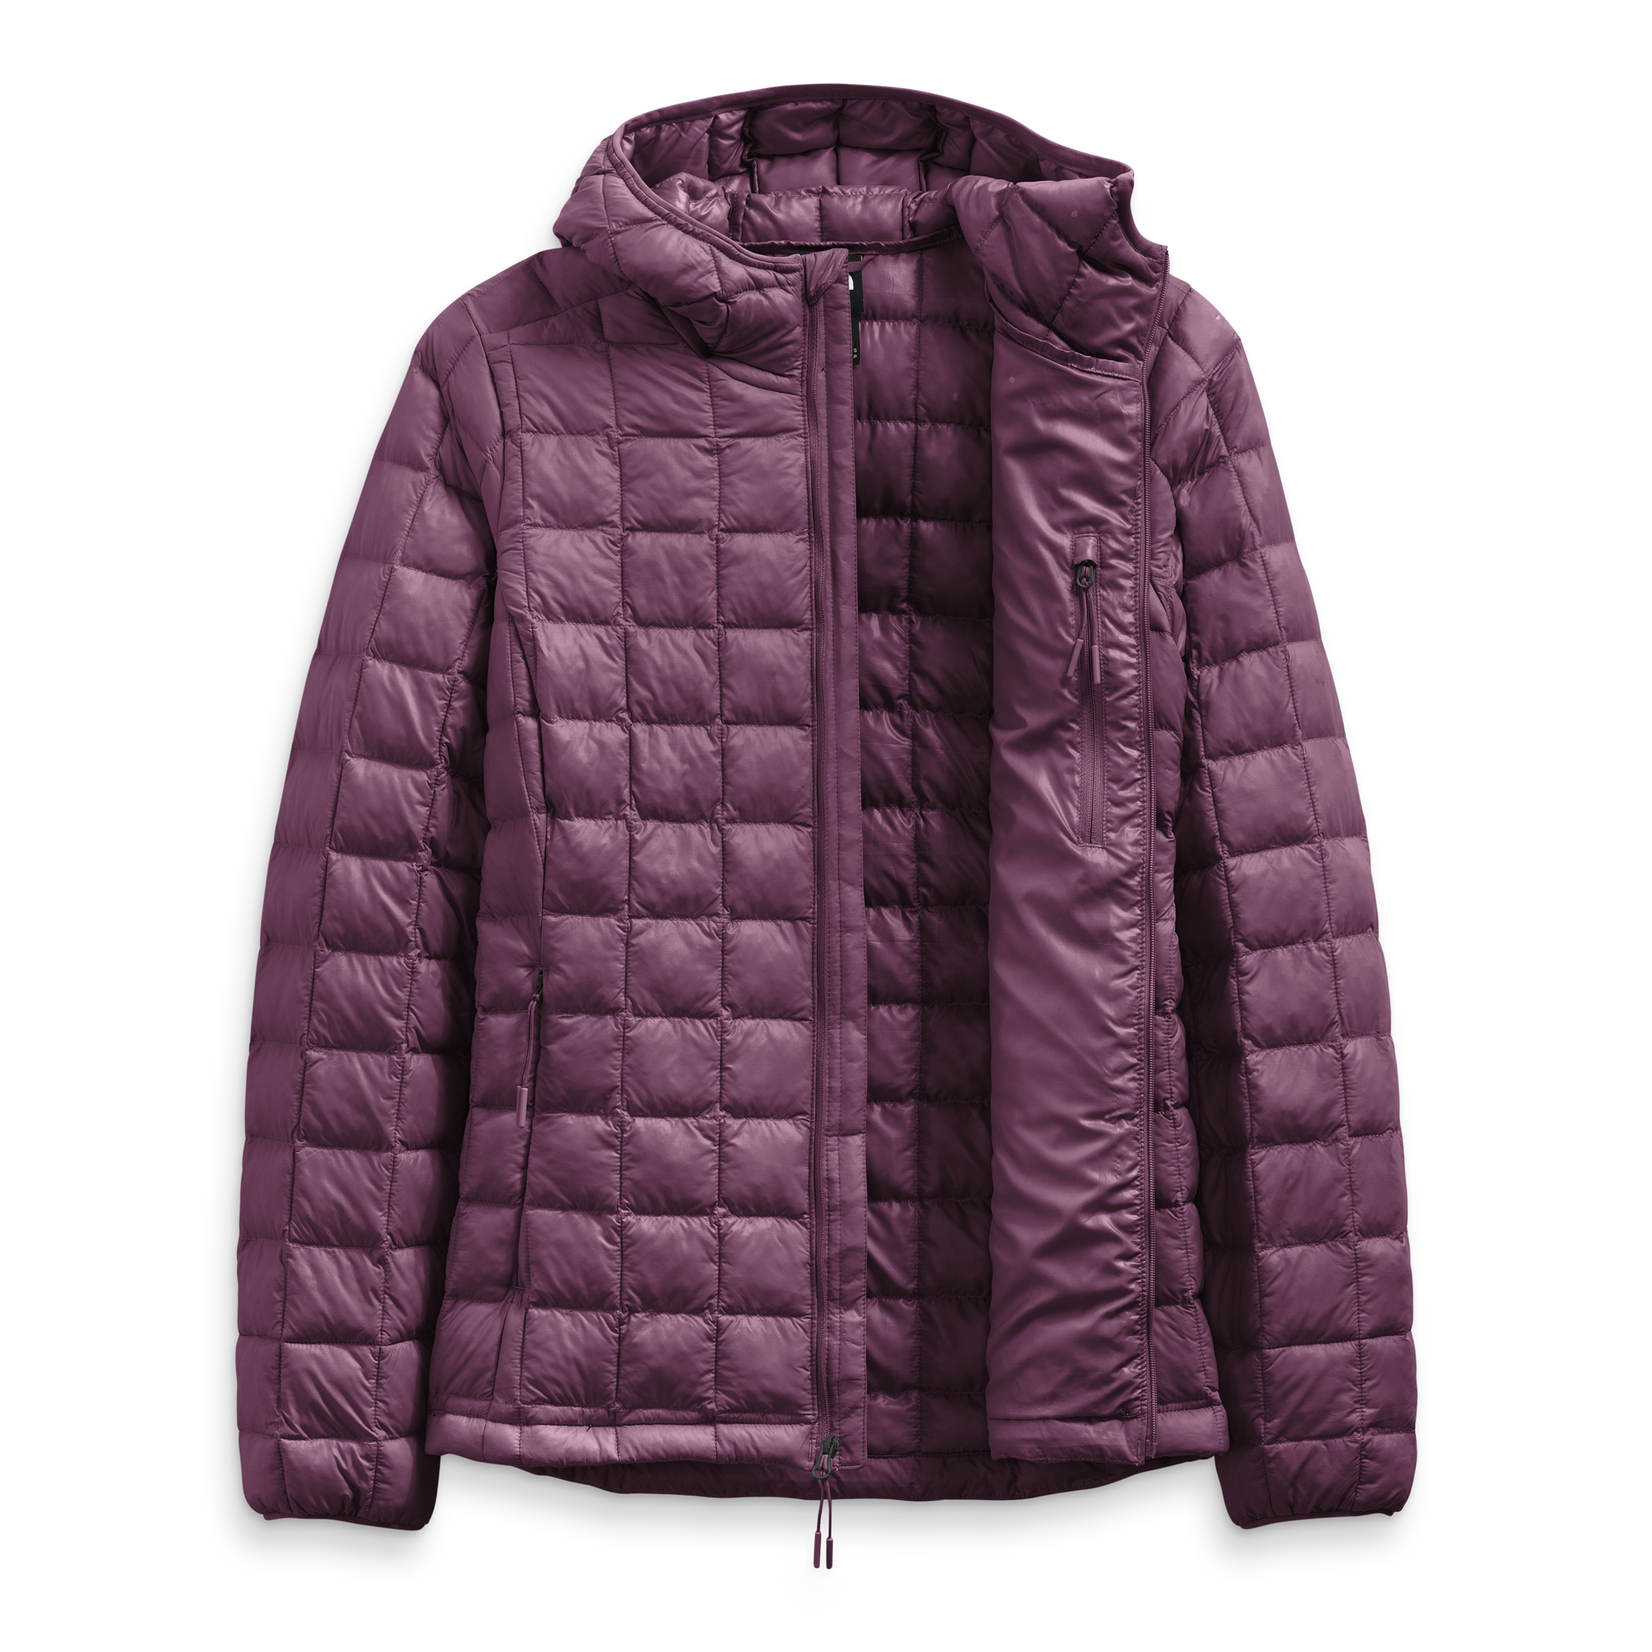 The North Face Women's Thermoball Eco Hoodie